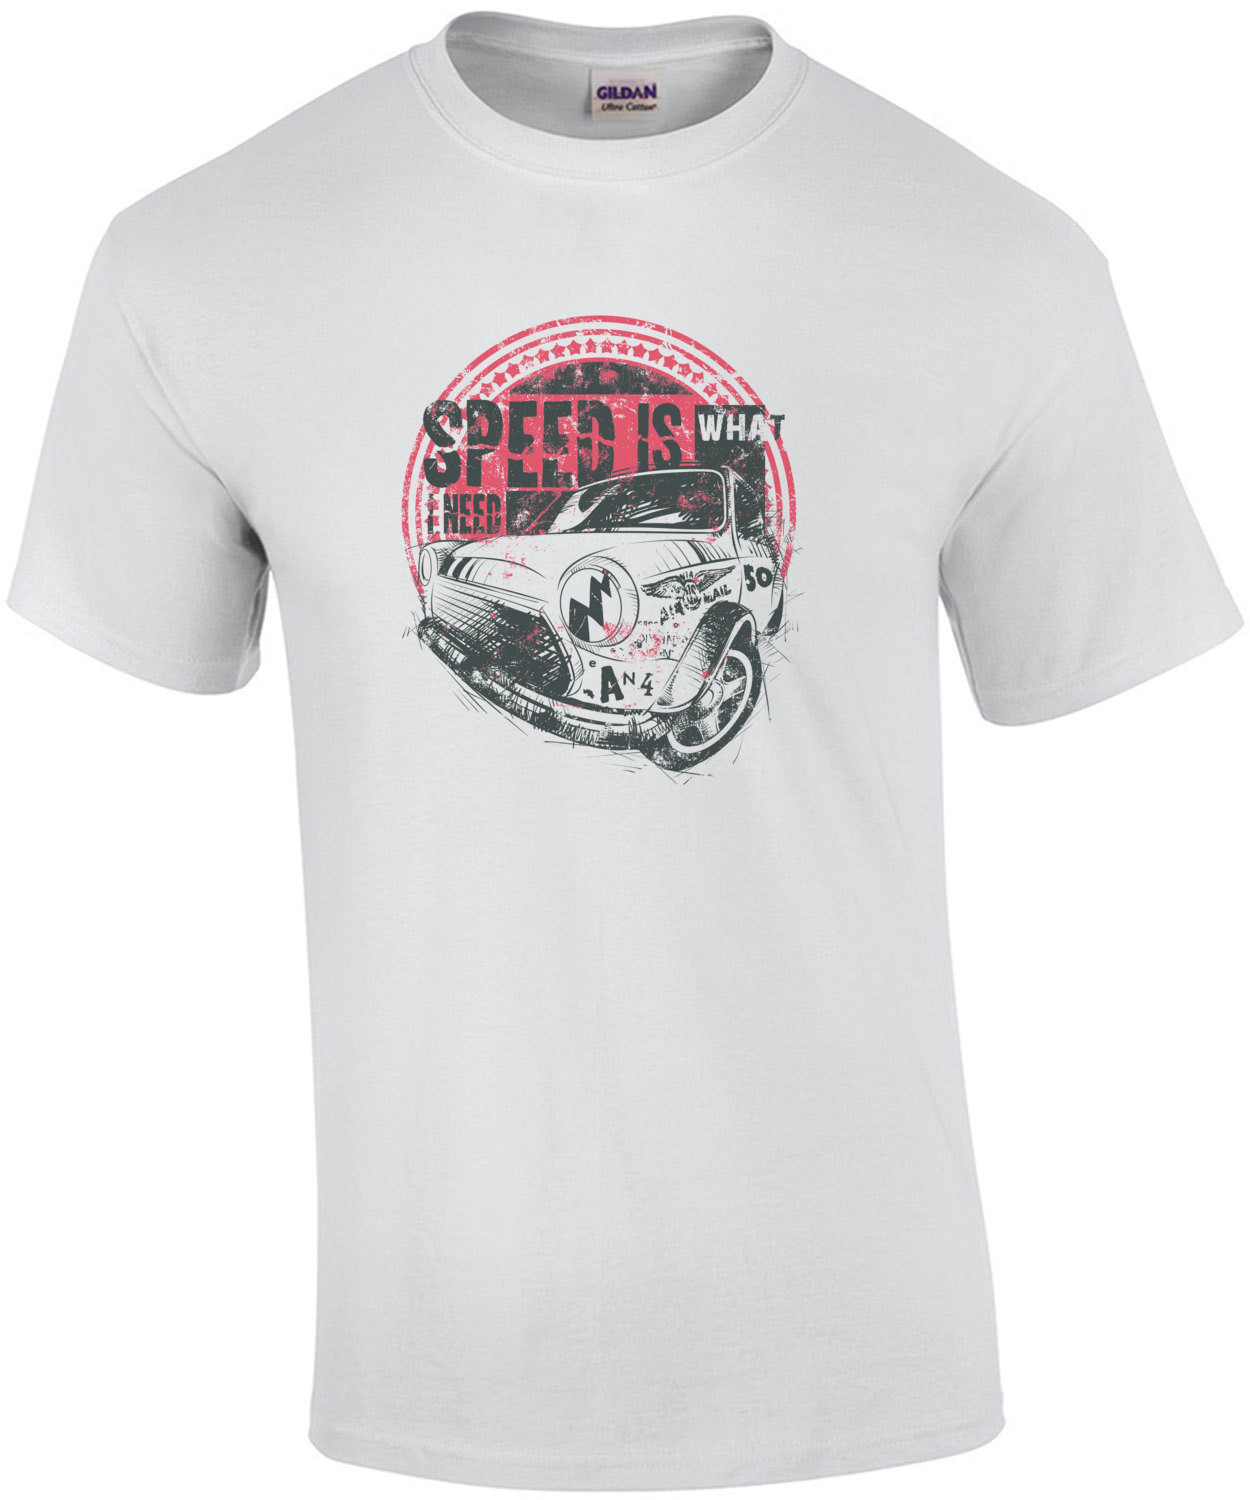 Speed Is What I Need Racing Graphic T-Shirt